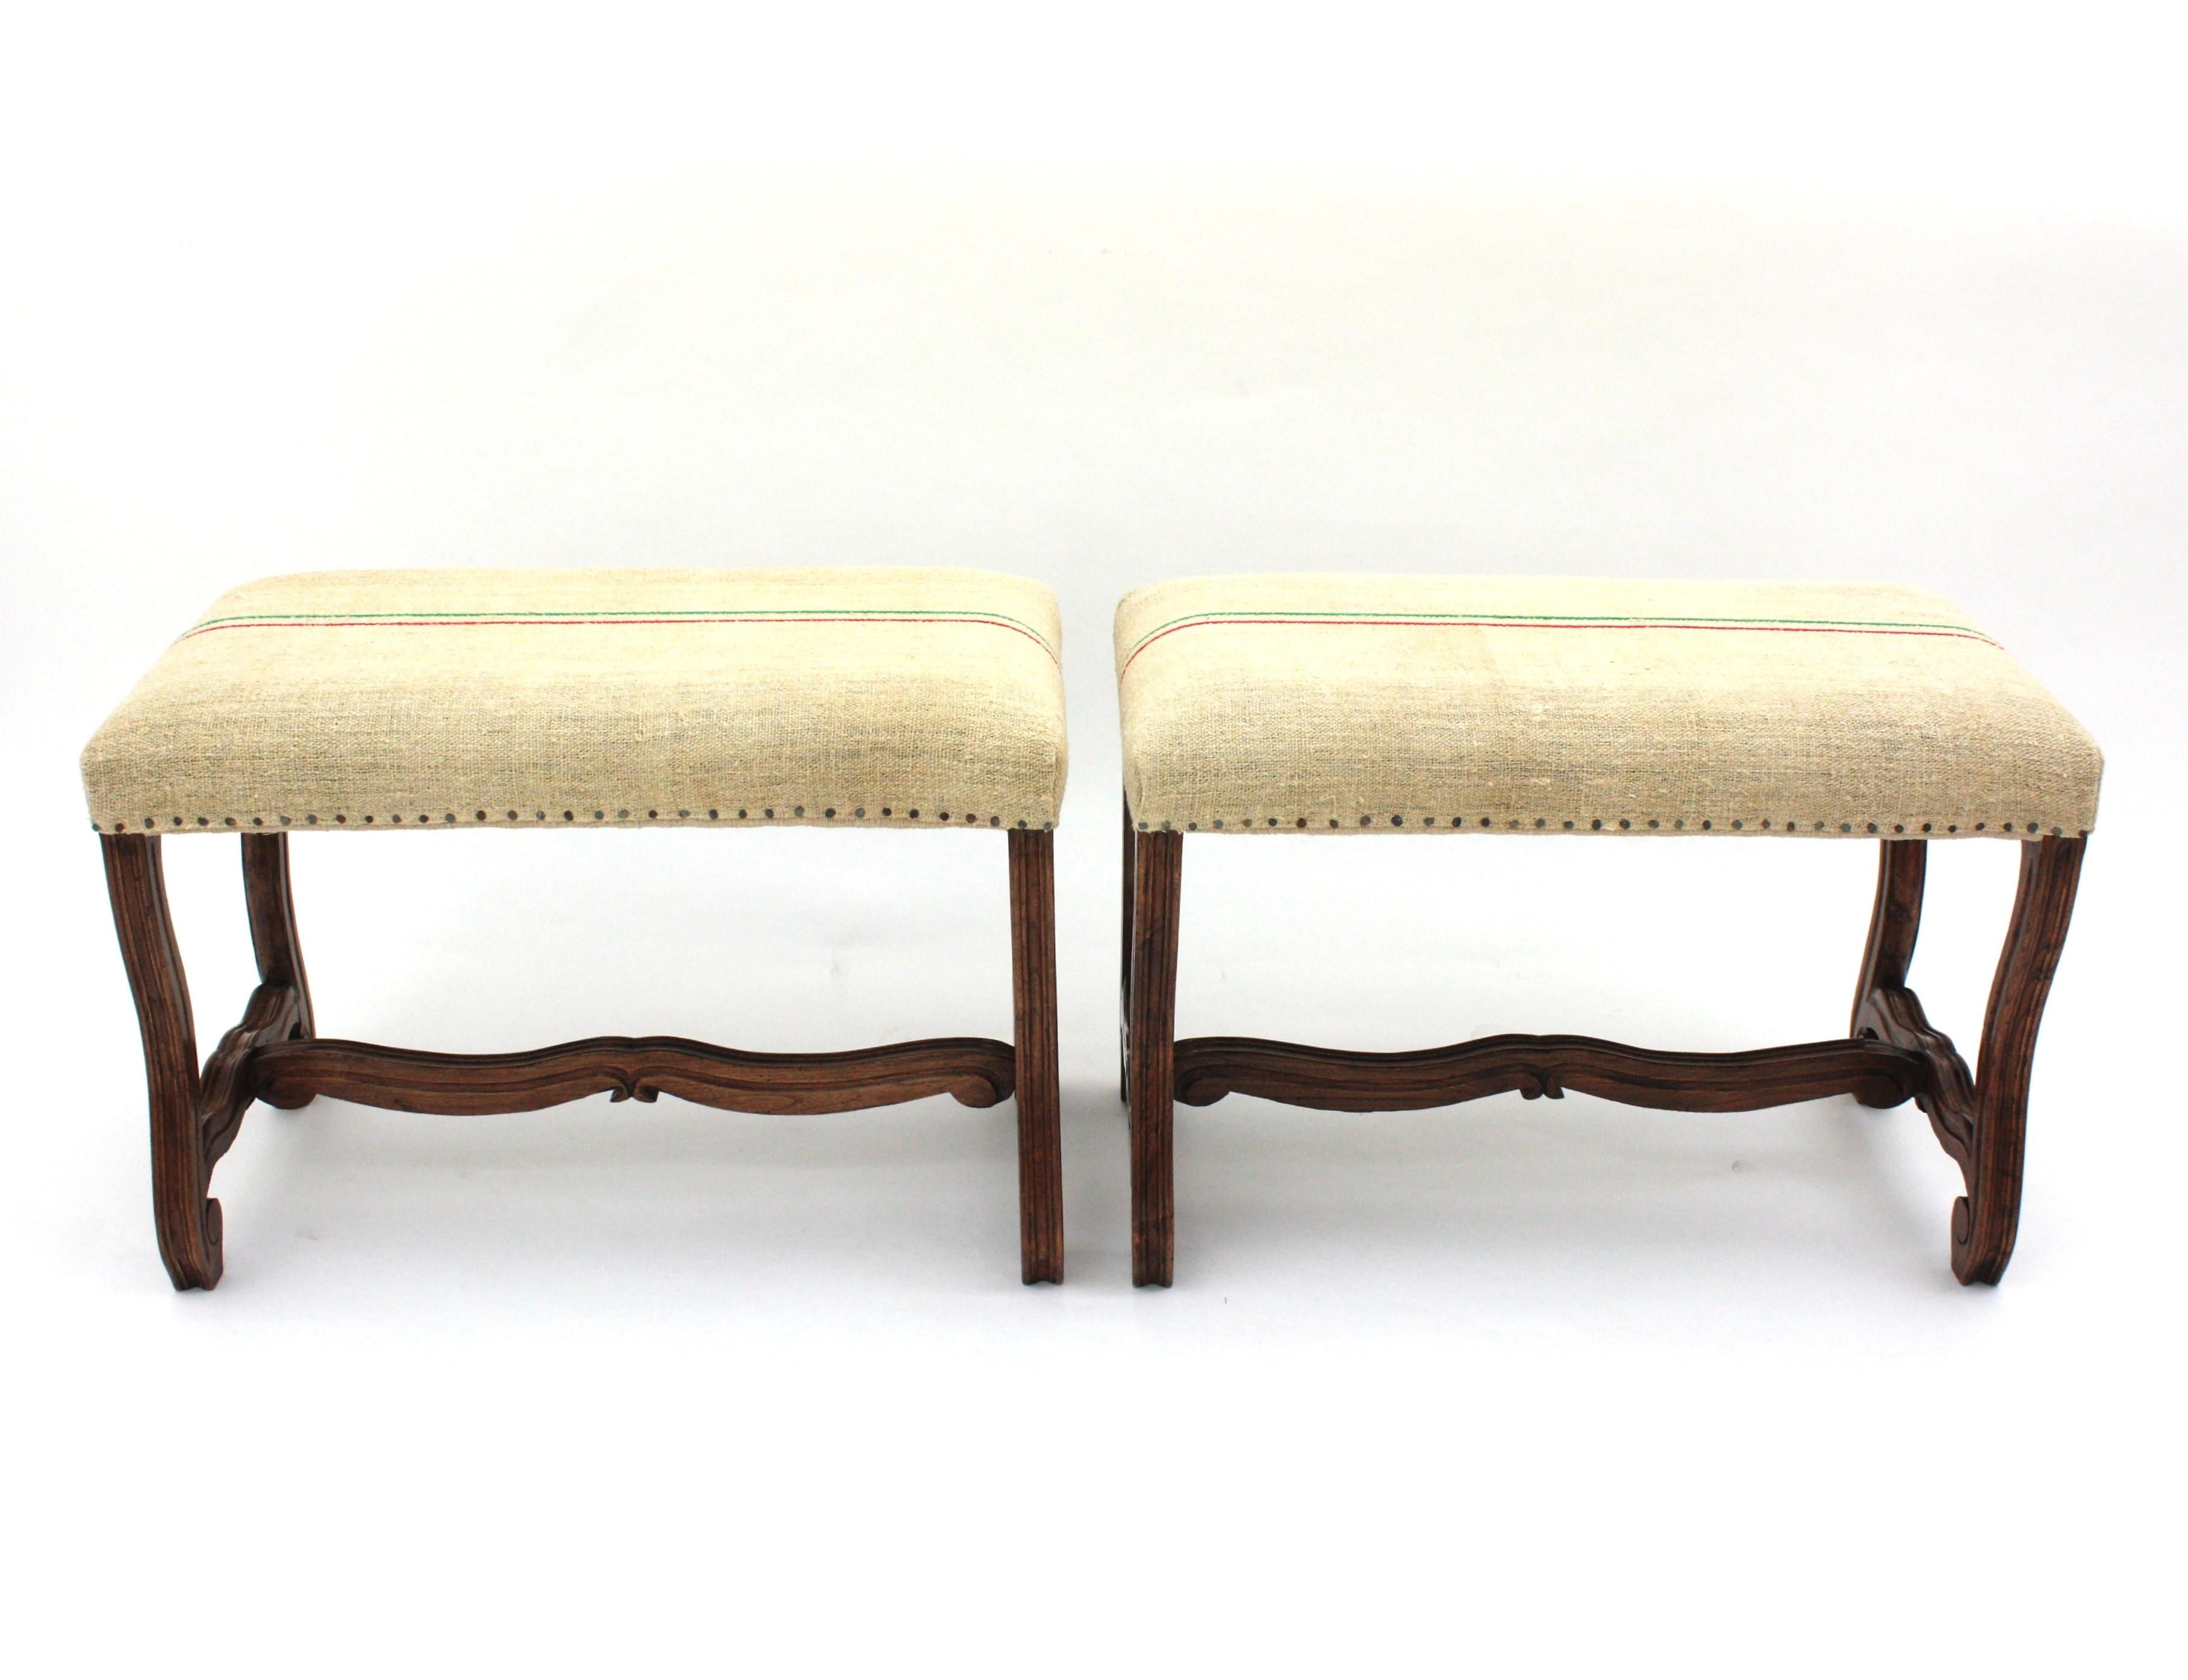 Pair of Os de Mouton Louis XIV Oak Stools New Upholstered in French Linen  For Sale 2